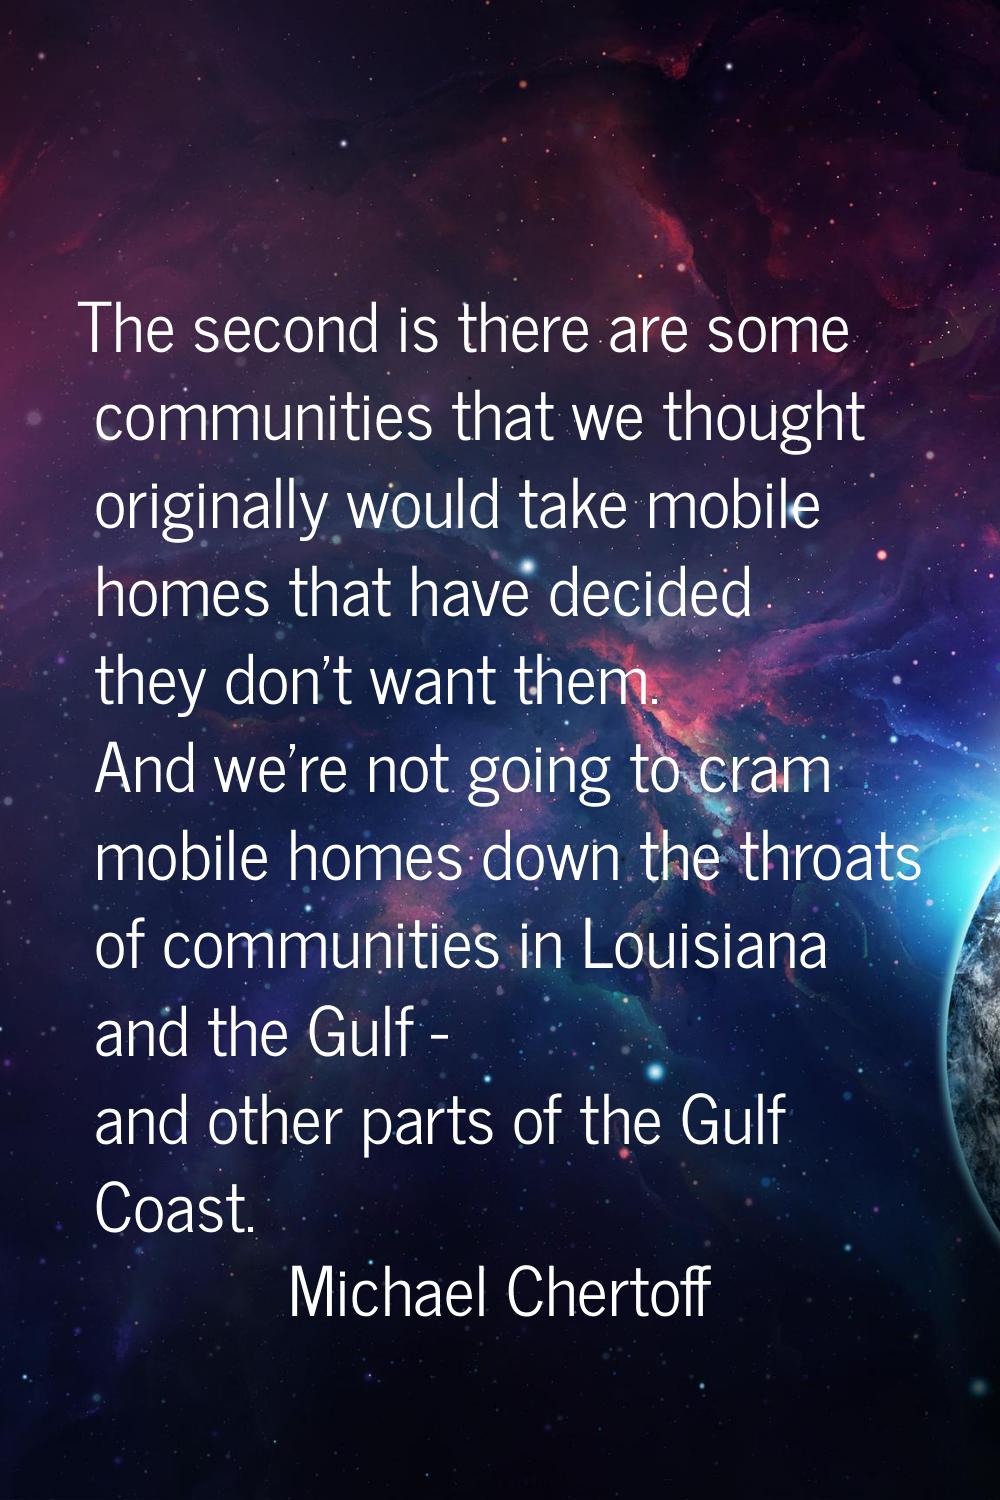 The second is there are some communities that we thought originally would take mobile homes that ha